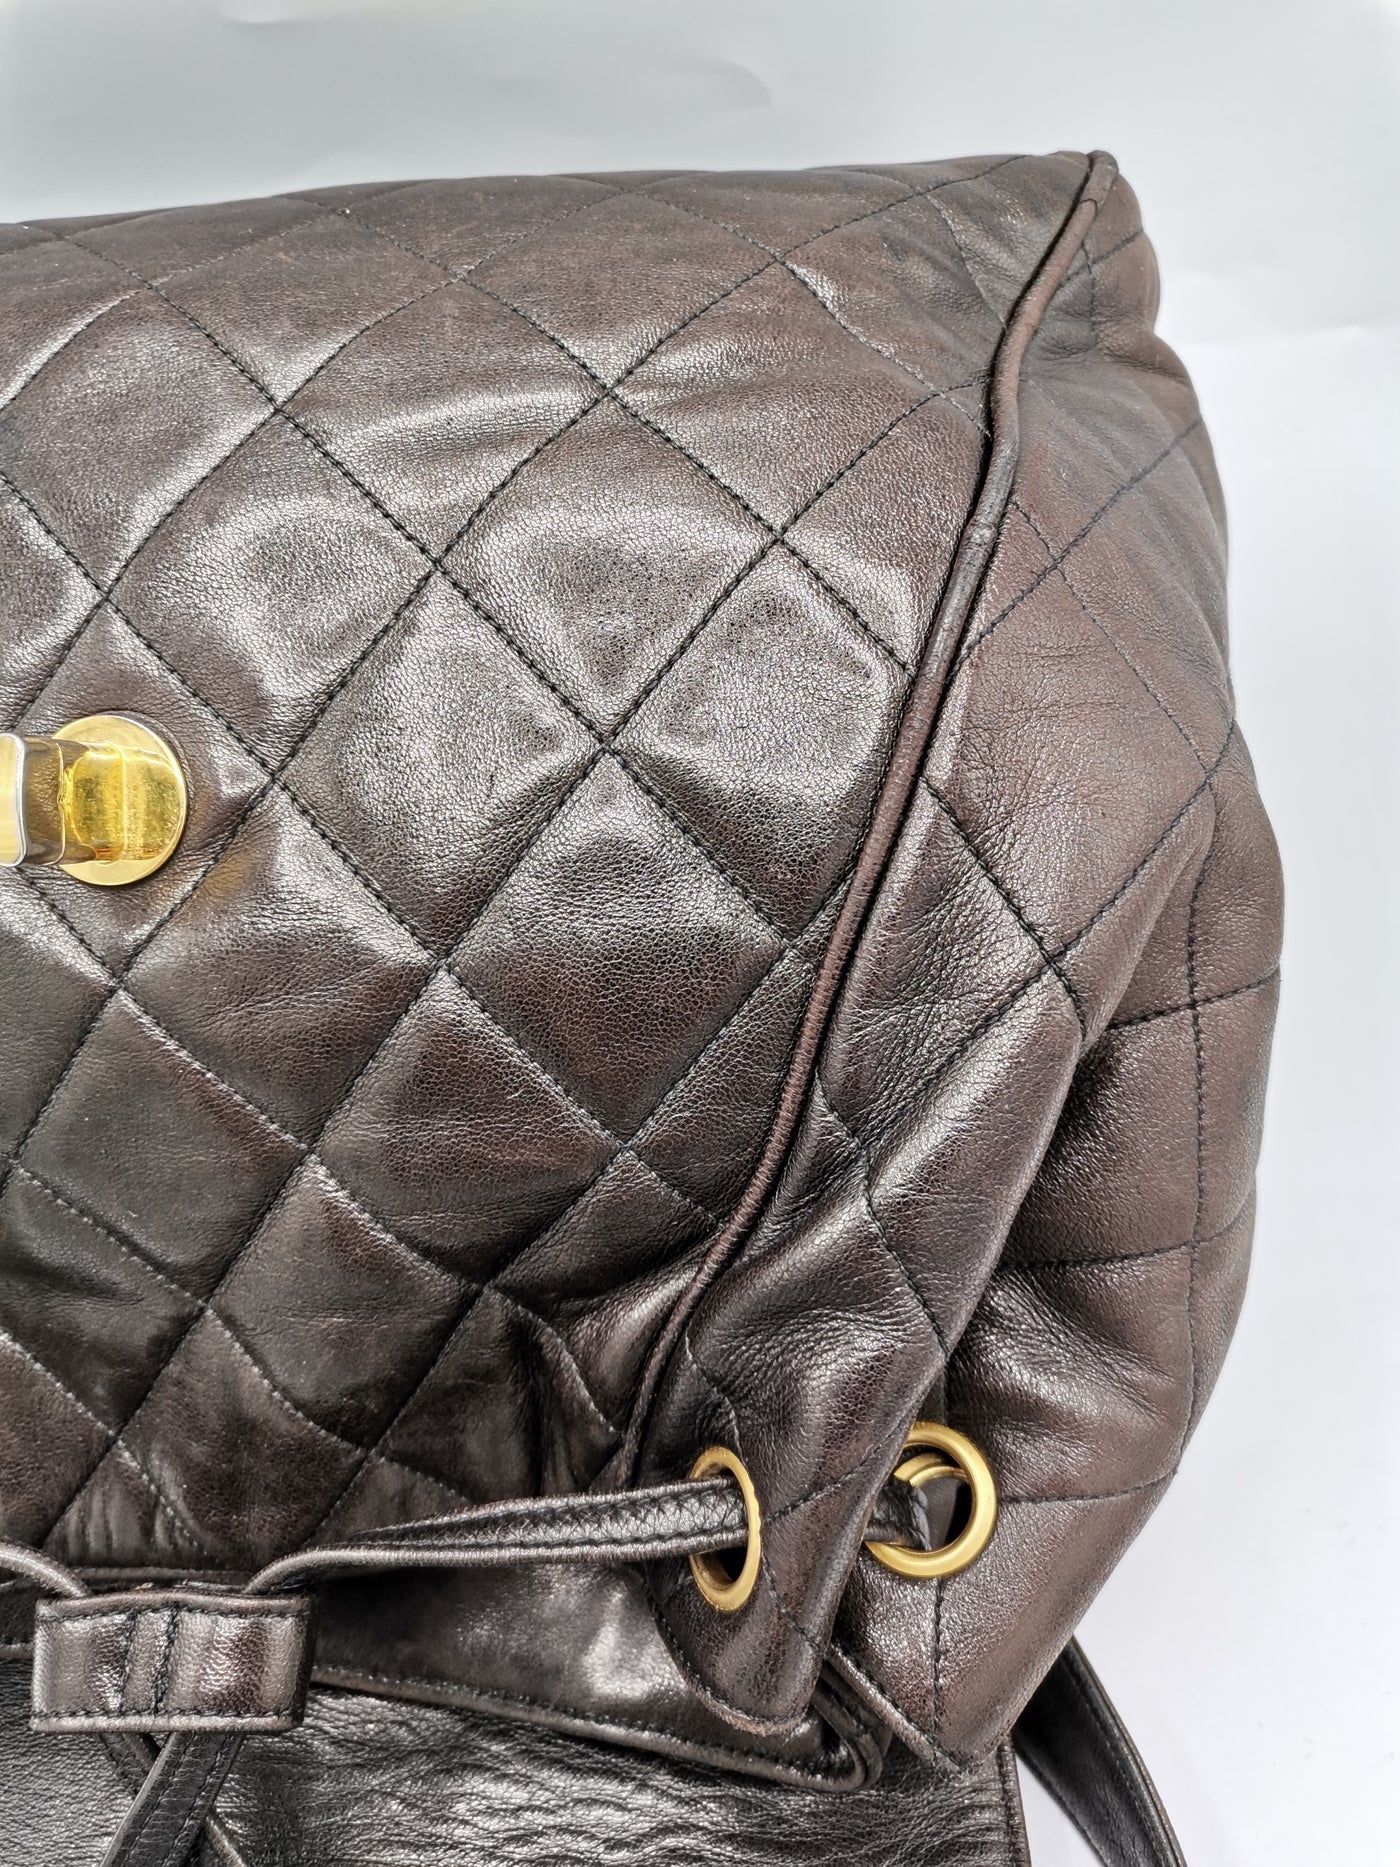 CHANEL rare vintage 1994-1996's brown backpack with gold hardware